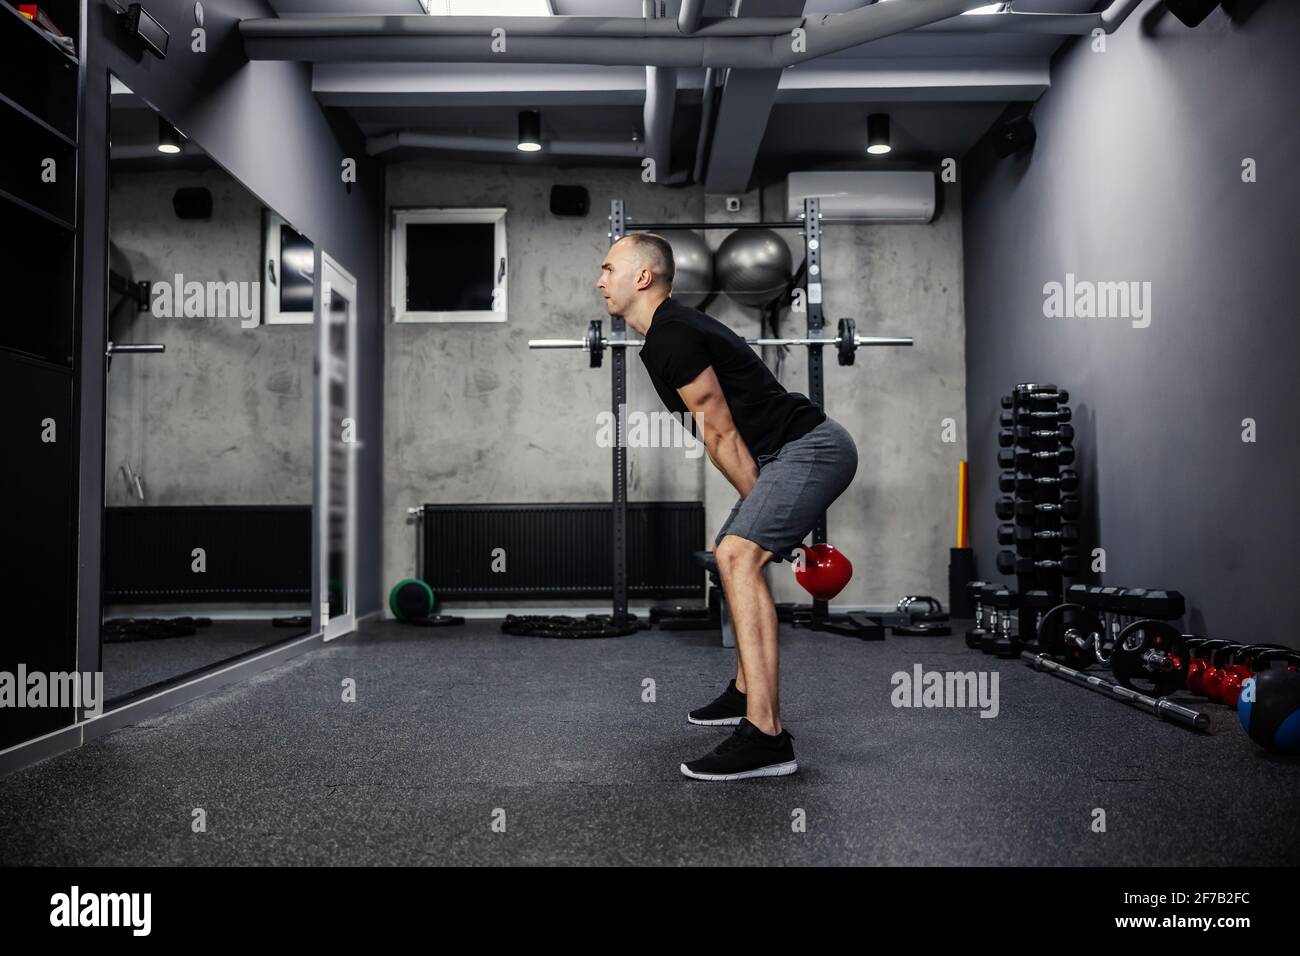 Dead lifting workout with a kettle bell. Man in sportswear with a black T-shirt stands with his legs spread and lifts a kettle bell with both arms in Stock Photo